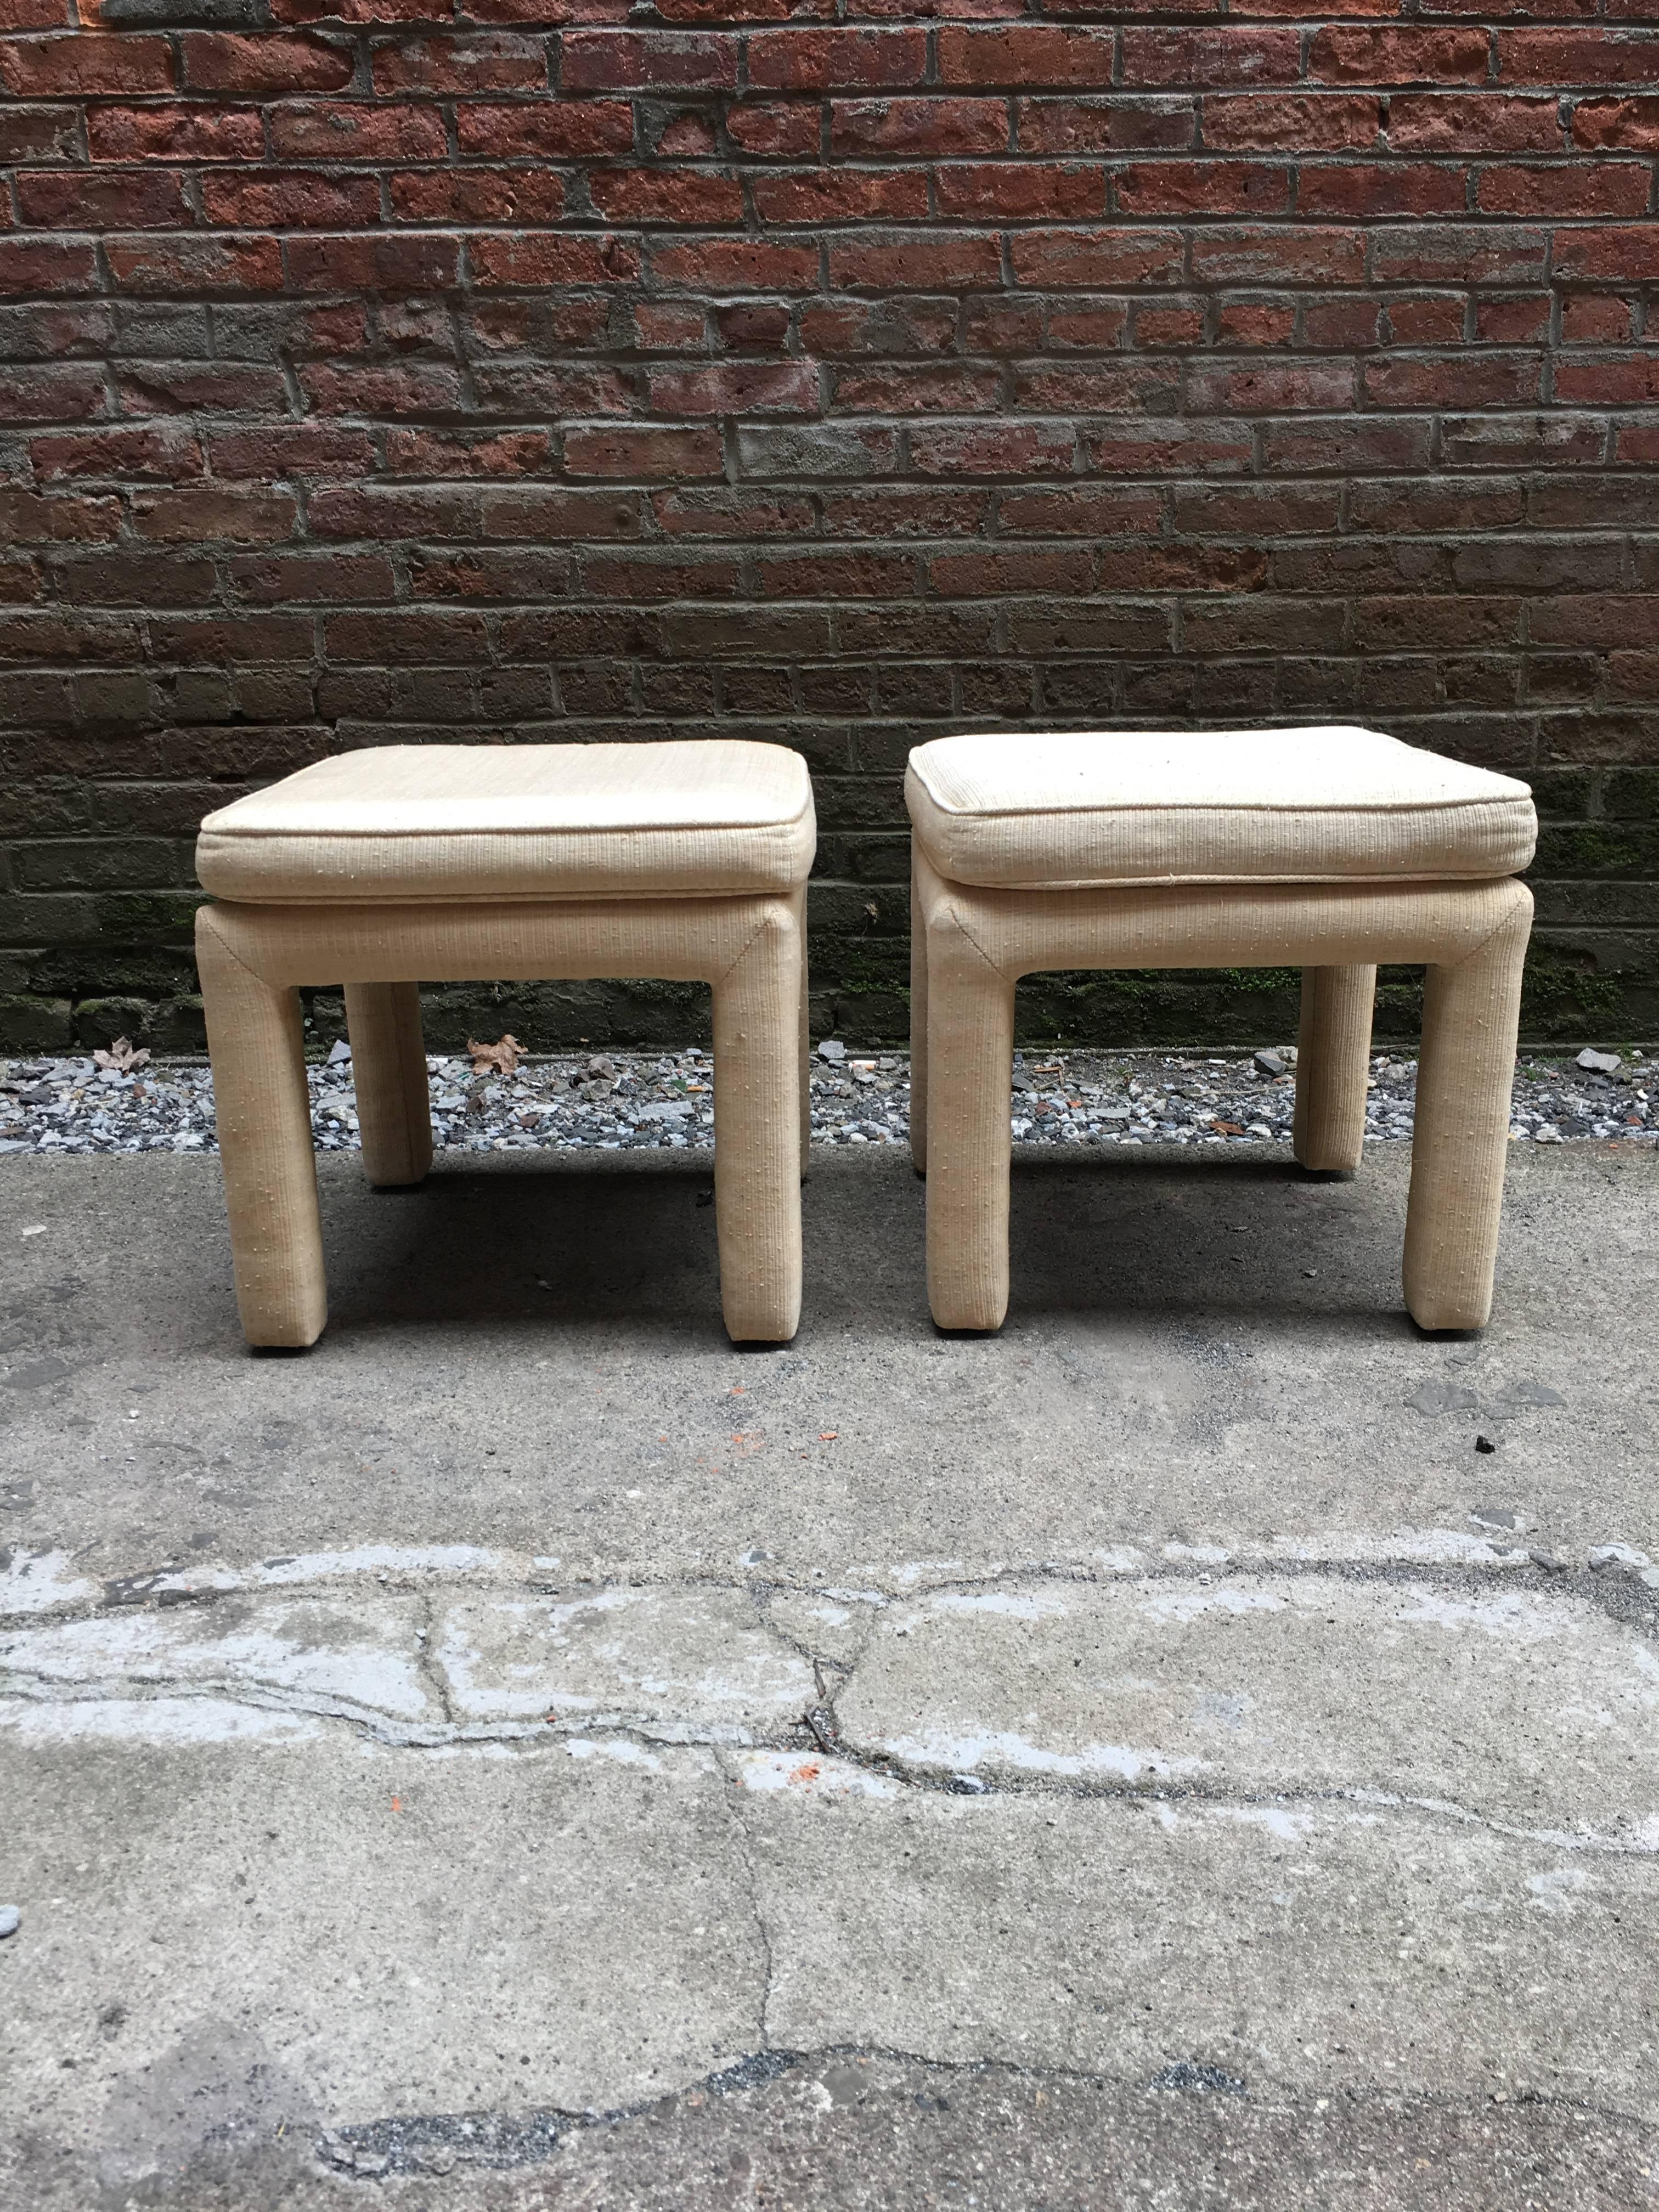 Pair of upholstered stools, circa 1970. Upholstered legs and seats. The pair needs to be recovered in any fabric you choose.

Measures: 18